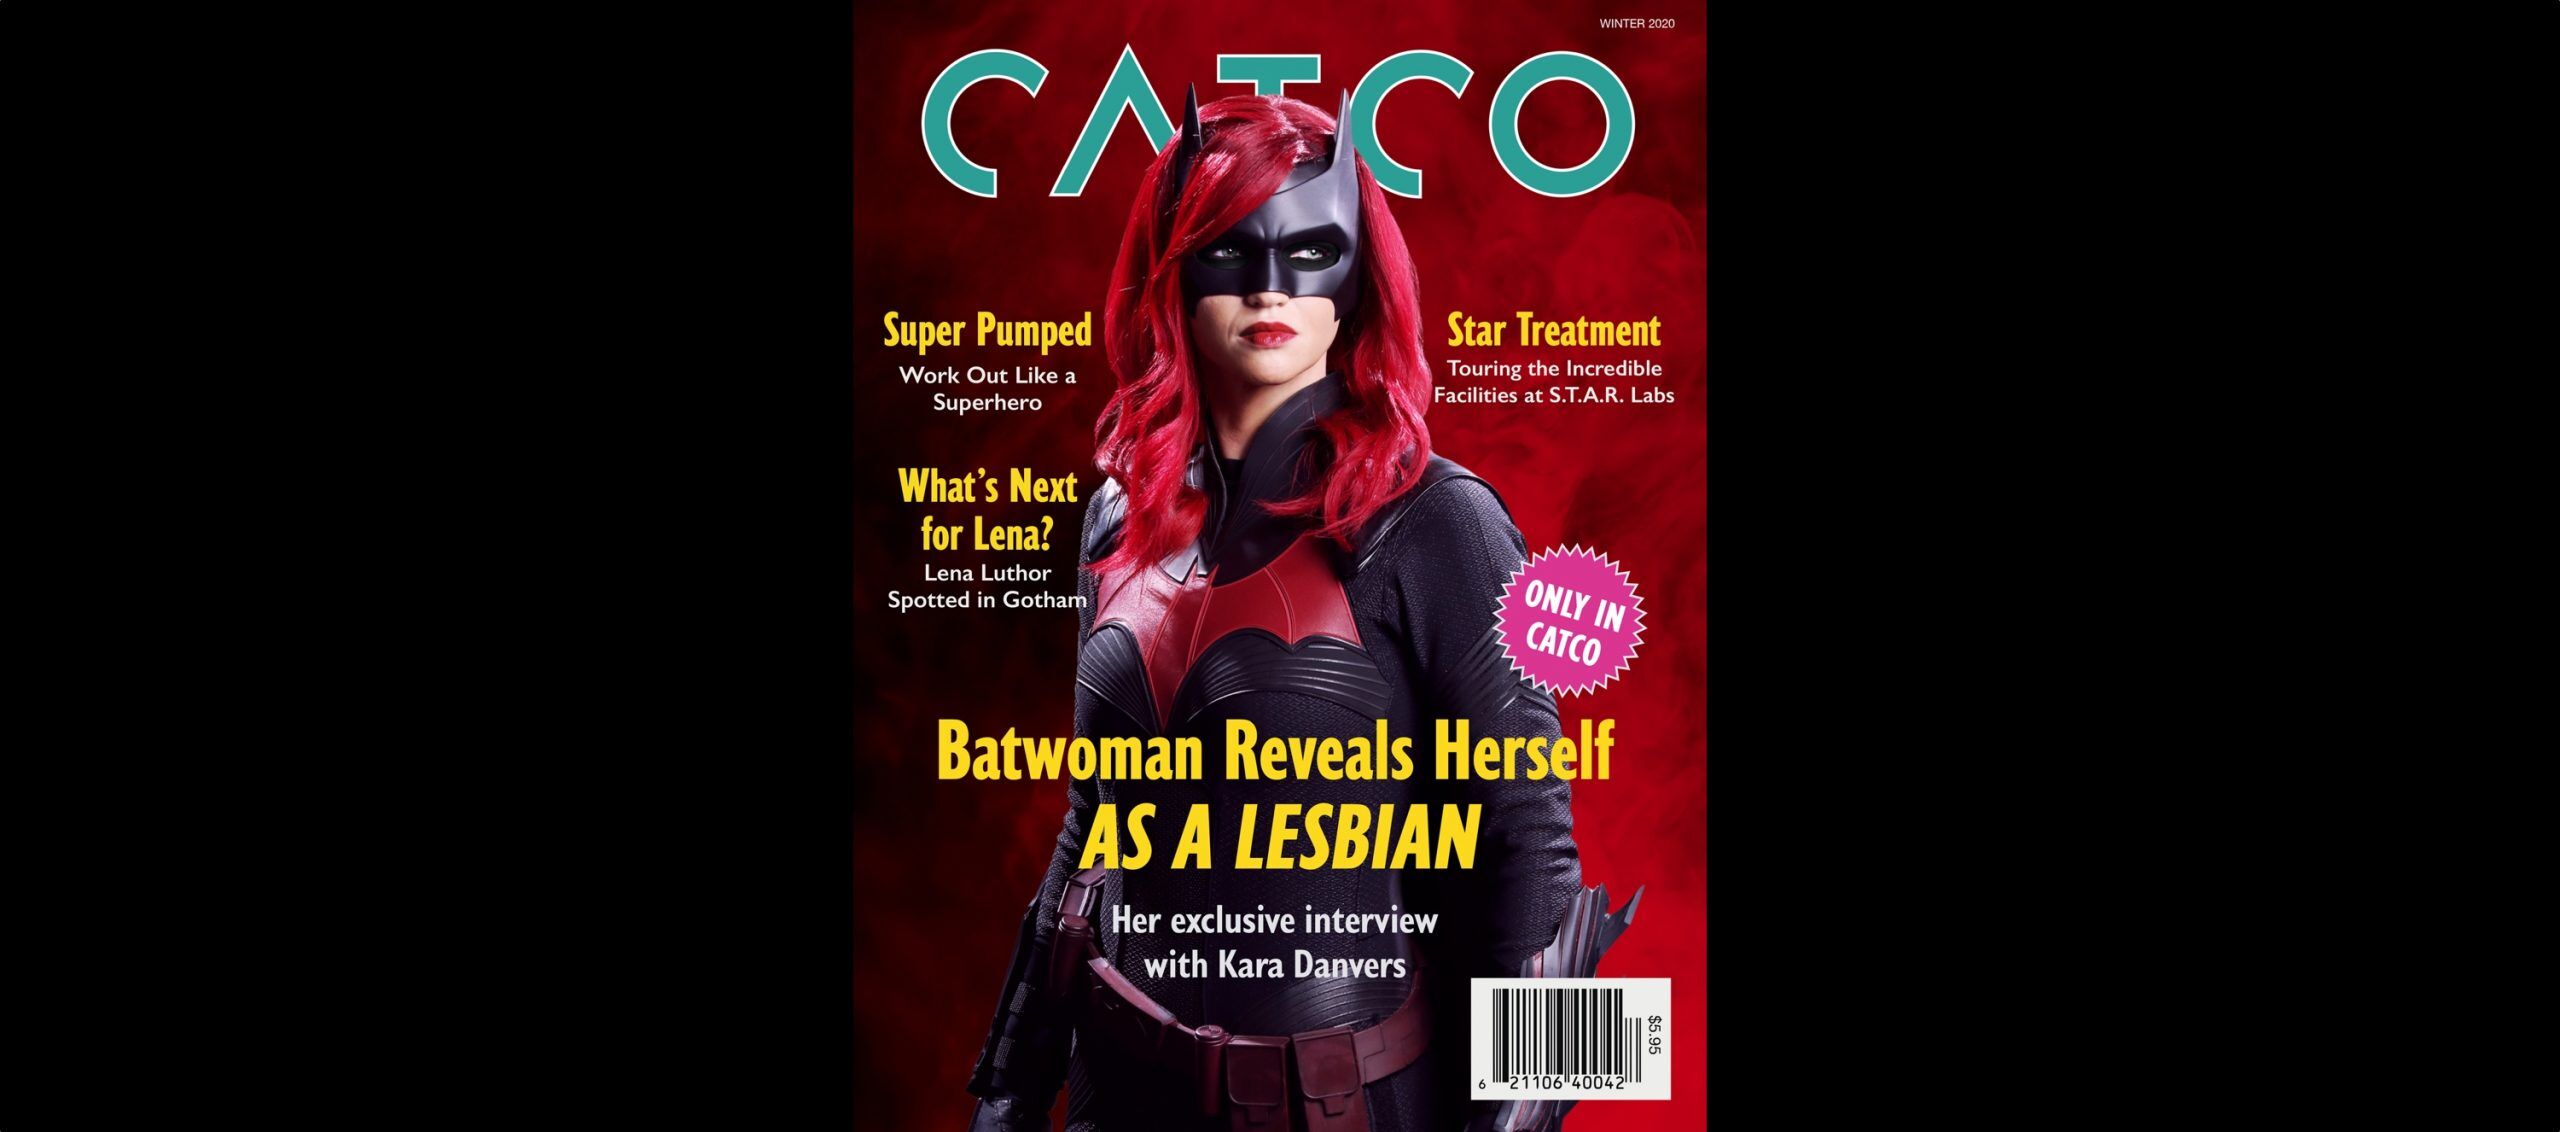 Batwoman came out in an interview with journalist Kara Danvers